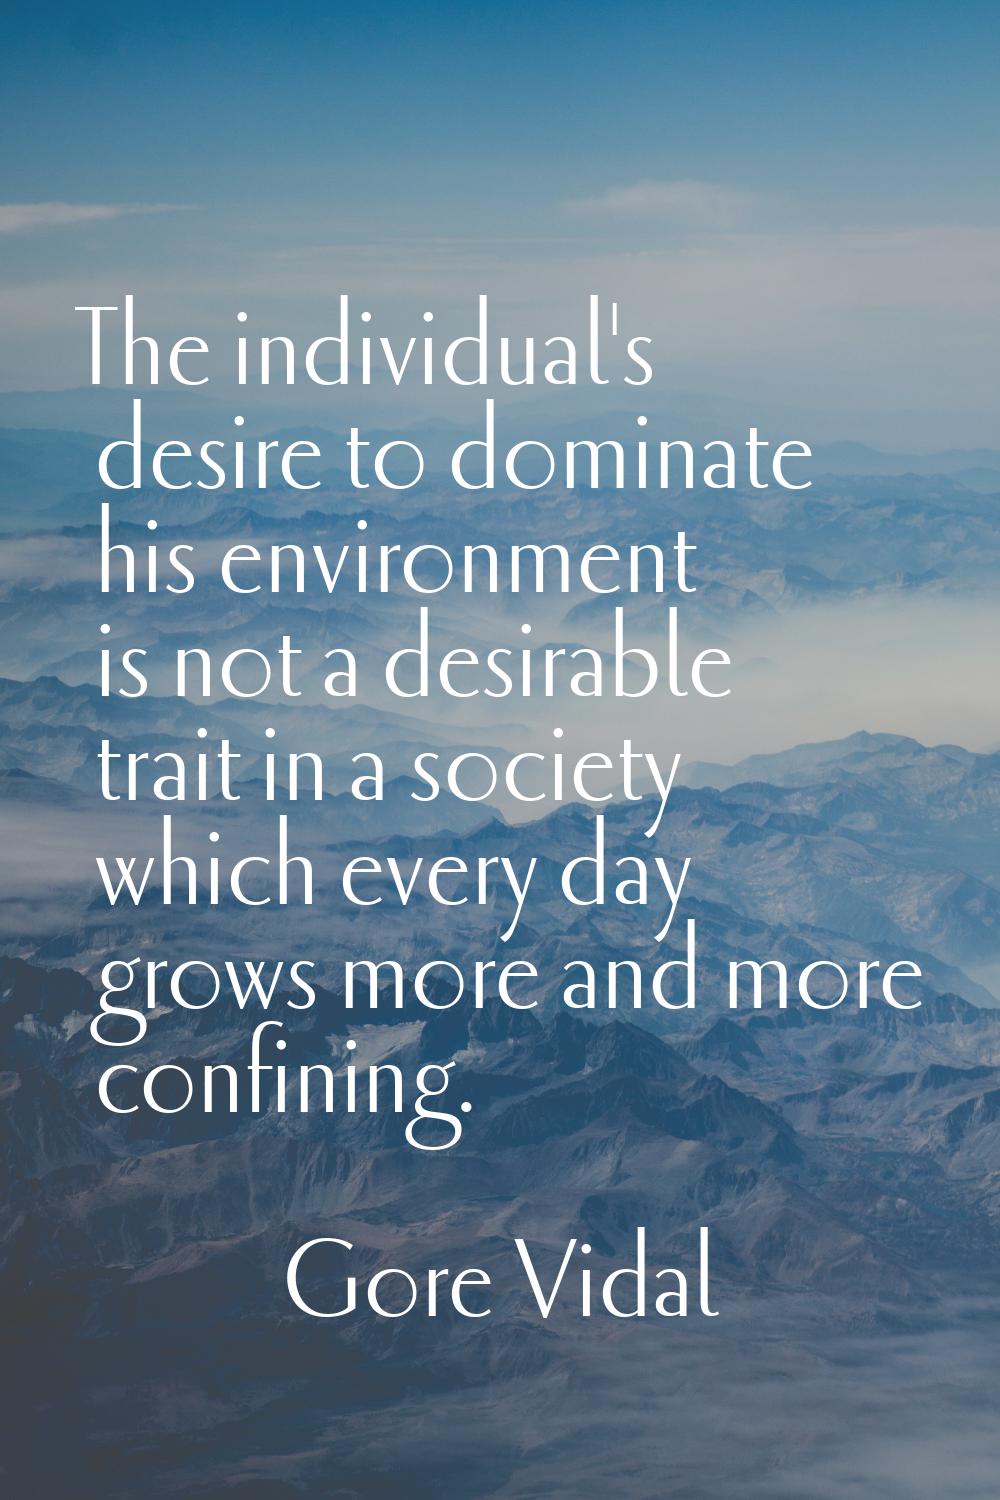 The individual's desire to dominate his environment is not a desirable trait in a society which eve